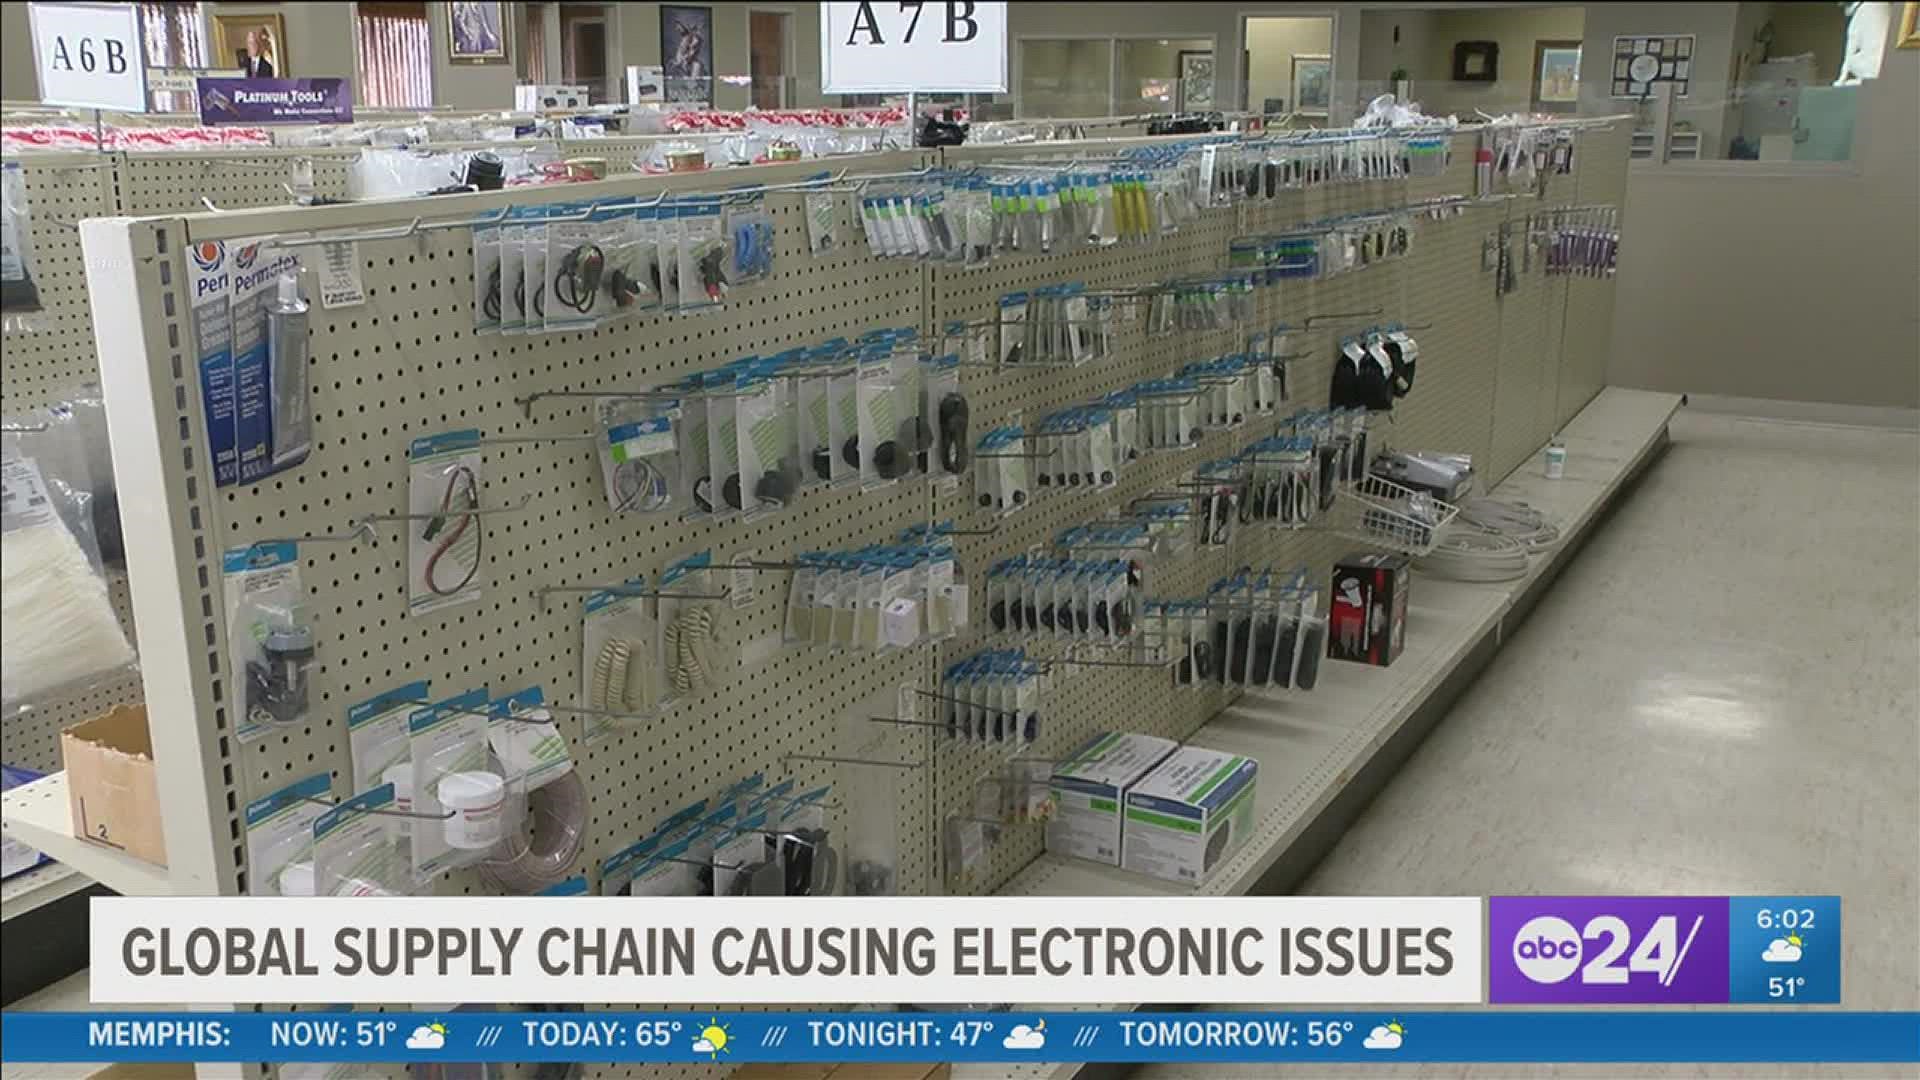 Fewer products are in stock ahead of holiday demand, and experts are warning about strain on hot ticket electronic items on wish lists.